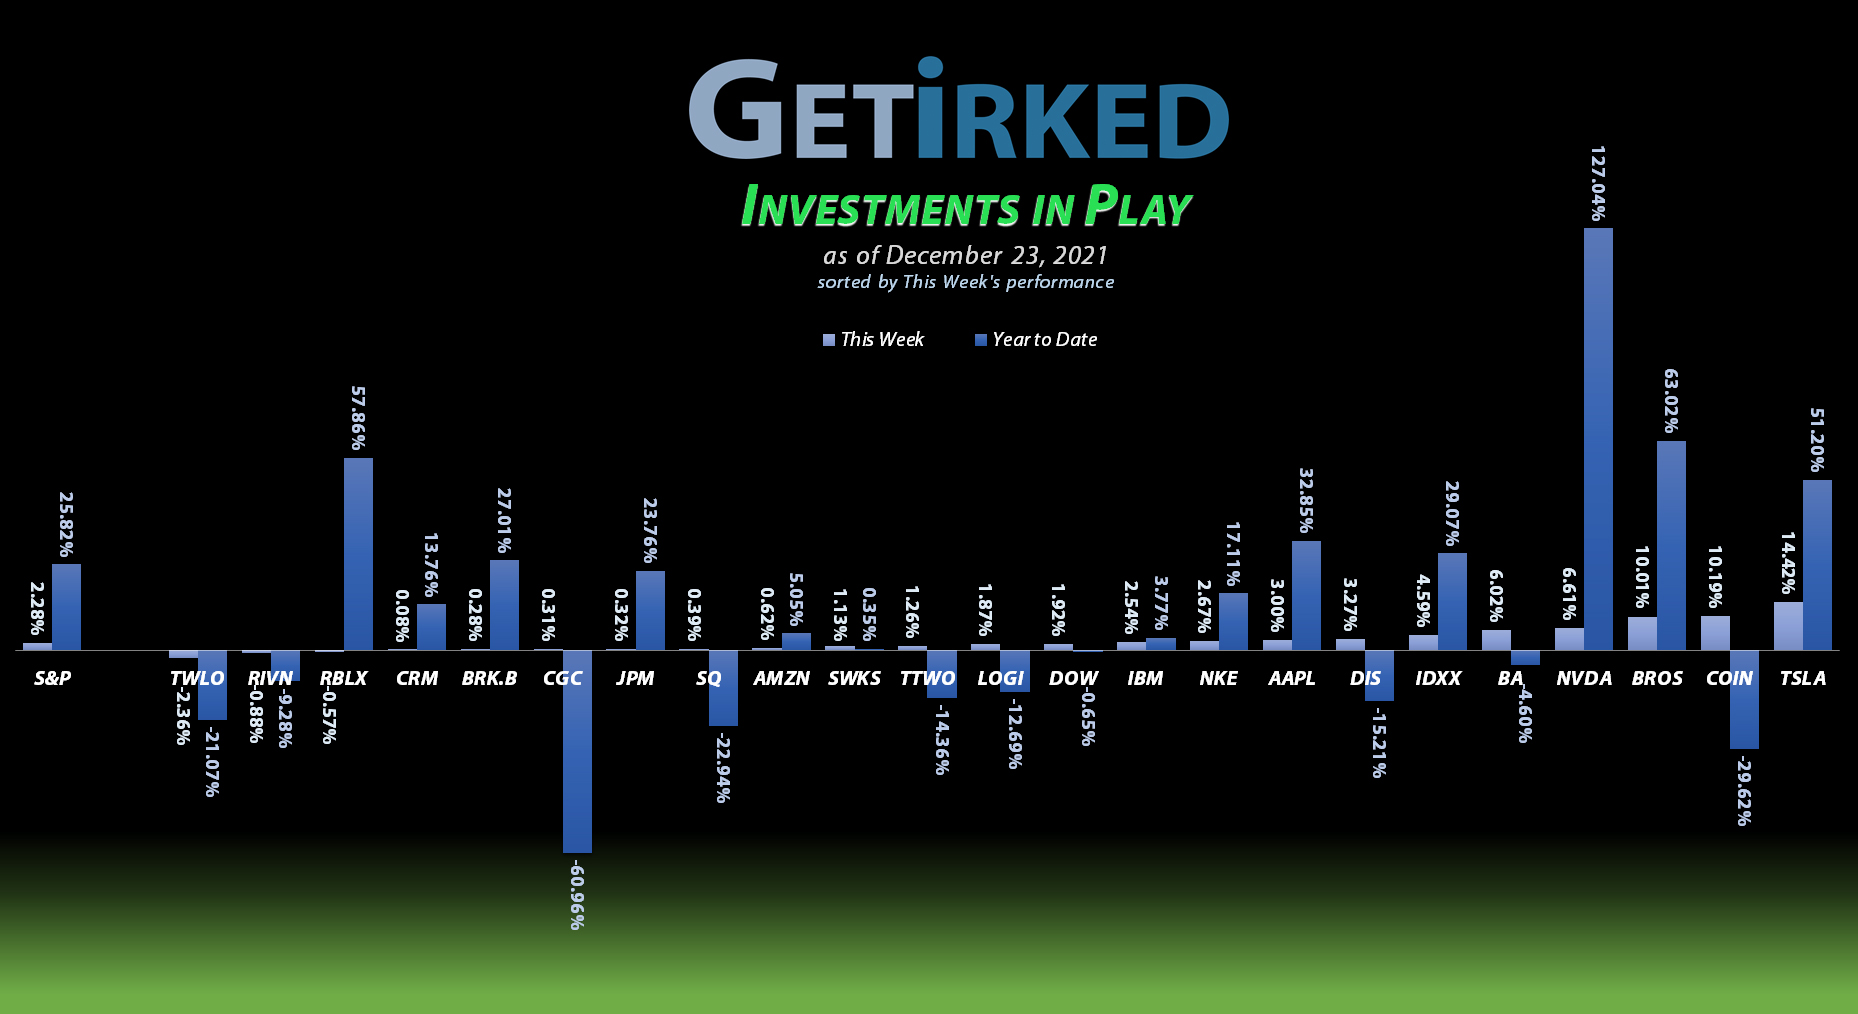 Get Irked - Investments in Play - December 23, 2021